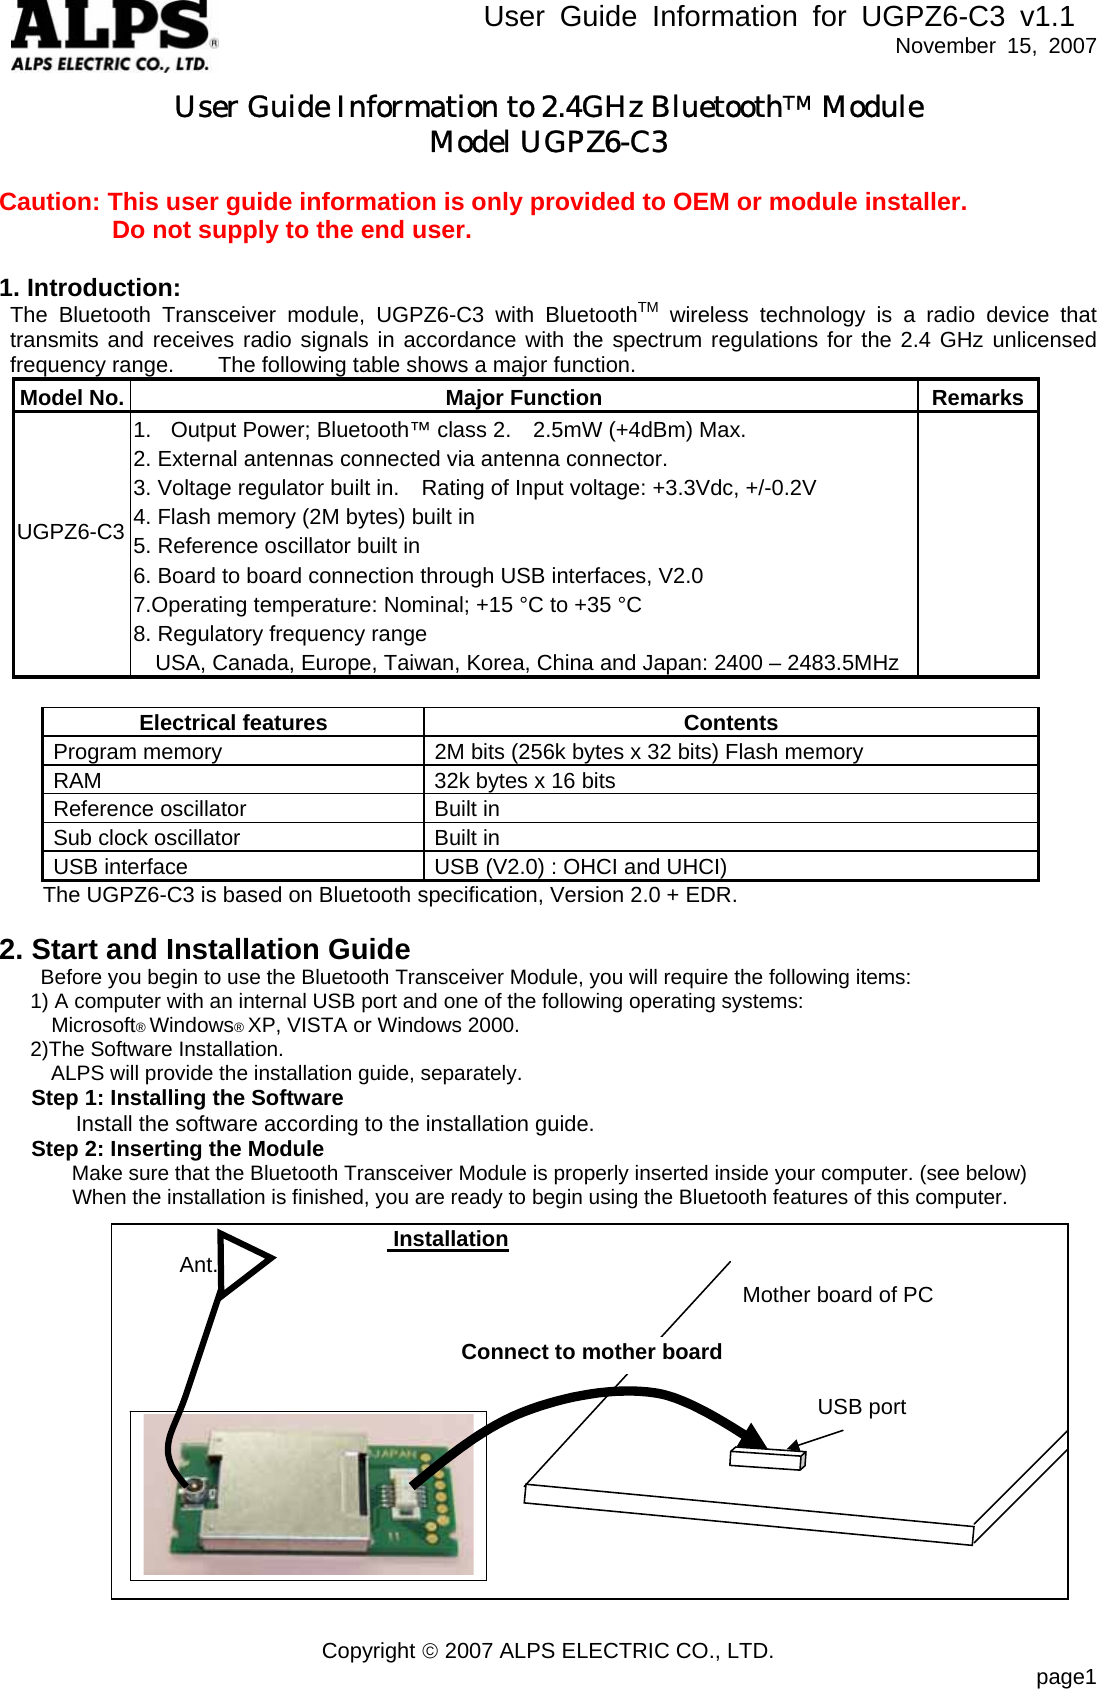        User Guide Information for UGPZ6-C3 v1.1   November 15, 2007 User Guide Information to 2.4GHz BluetoothTM Module Model UGPZ6-C3  Caution: This user guide information is only provided to OEM or module installer.          Do not supply to the end user.    1. Introduction:  The Bluetooth Transceiver module, UGPZ6-C3 with BluetoothTM wireless technology is a radio device that transmits and receives radio signals in accordance with the spectrum regulations for the 2.4 GHz unlicensed frequency range.    The following table shows a major function. Model No. Major Function RemarksUGPZ6-C3  1.  Output Power; Bluetooth™ class 2.    2.5mW (+4dBm) Max. 2. External antennas connected via antenna connector. 3. Voltage regulator built in.    Rating of Input voltage: +3.3Vdc, +/-0.2V 4. Flash memory (2M bytes) built in 5. Reference oscillator built in 6. Board to board connection through USB interfaces, V2.0 7.Operating temperature: Nominal; +15 °C to +35 °C   8. Regulatory frequency range     USA, Canada, Europe, Taiwan, Korea, China and Japan: 2400 – 2483.5MHz       Electrical features Contents Program memory  2M bits (256k bytes x 32 bits) Flash memory RAM  32k bytes x 16 bits Reference oscillator  Built in Sub clock oscillator  Built in USB interface  USB (V2.0) : OHCI and UHCI) The UGPZ6-C3 is based on Bluetooth specification, Version 2.0 + EDR.   2. Start and Installation Guide Before you begin to use the Bluetooth Transceiver Module, you will require the following items: 1) A computer with an internal USB port and one of the following operating systems: Microsoft® Windows® XP, VISTA or Windows 2000. 2)The Software Installation.     ALPS will provide the installation guide, separately. Step 1: Installing the Software               Install the software according to the installation guide. Step 2: Inserting the Module Make sure that the Bluetooth Transceiver Module is properly inserted inside your computer. (see below) When the installation is finished, you are ready to begin using the Bluetooth features of this computer.                           Installation      Ant.            Connect to mother board USB port   Mother board of PC                 Copyright © 2007 ALPS ELECTRIC CO., LTD.                           page1  